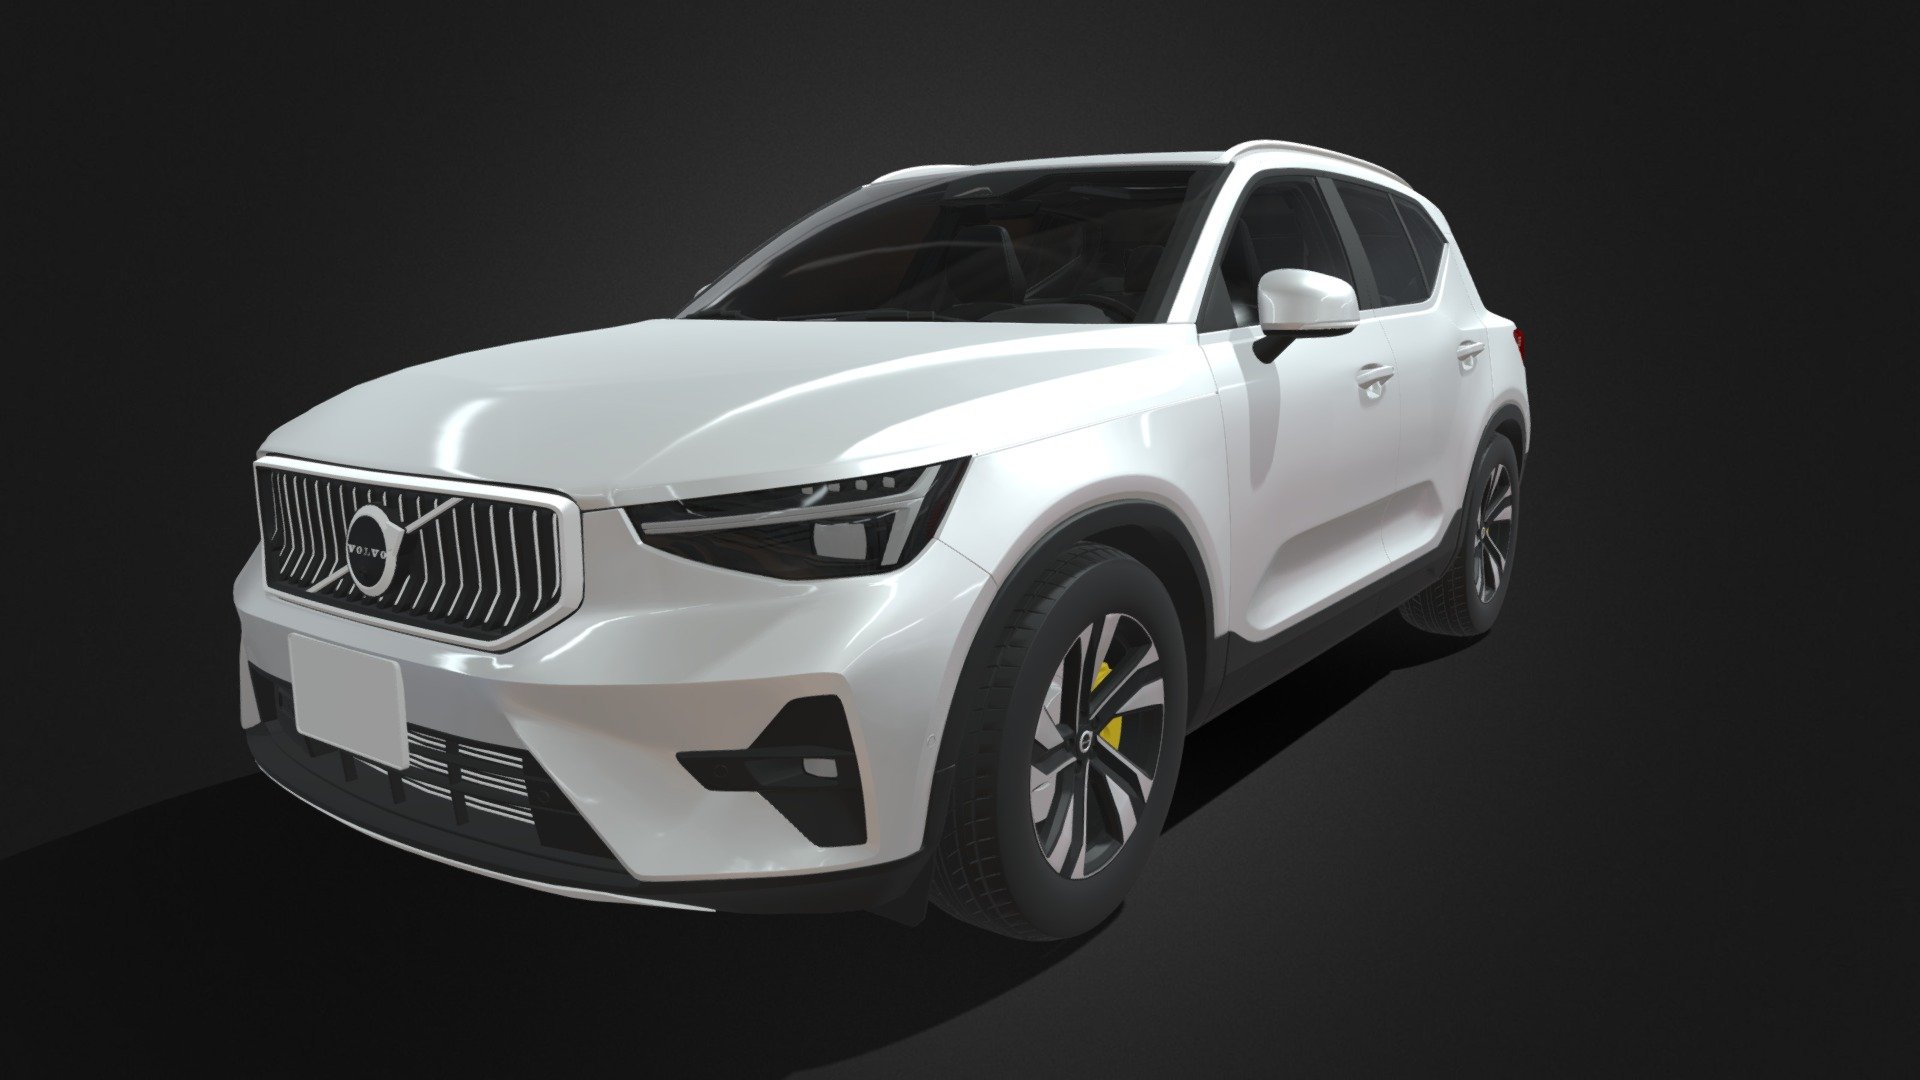 The Volvo XC40 is a subcompact luxury crossover SUV manufactured by Volvo Cars. It was unveiled on 21 September 2017 as the smallest SUV model from Volvo - Volvo XC40 - 3D model by Davidson3D 3d model